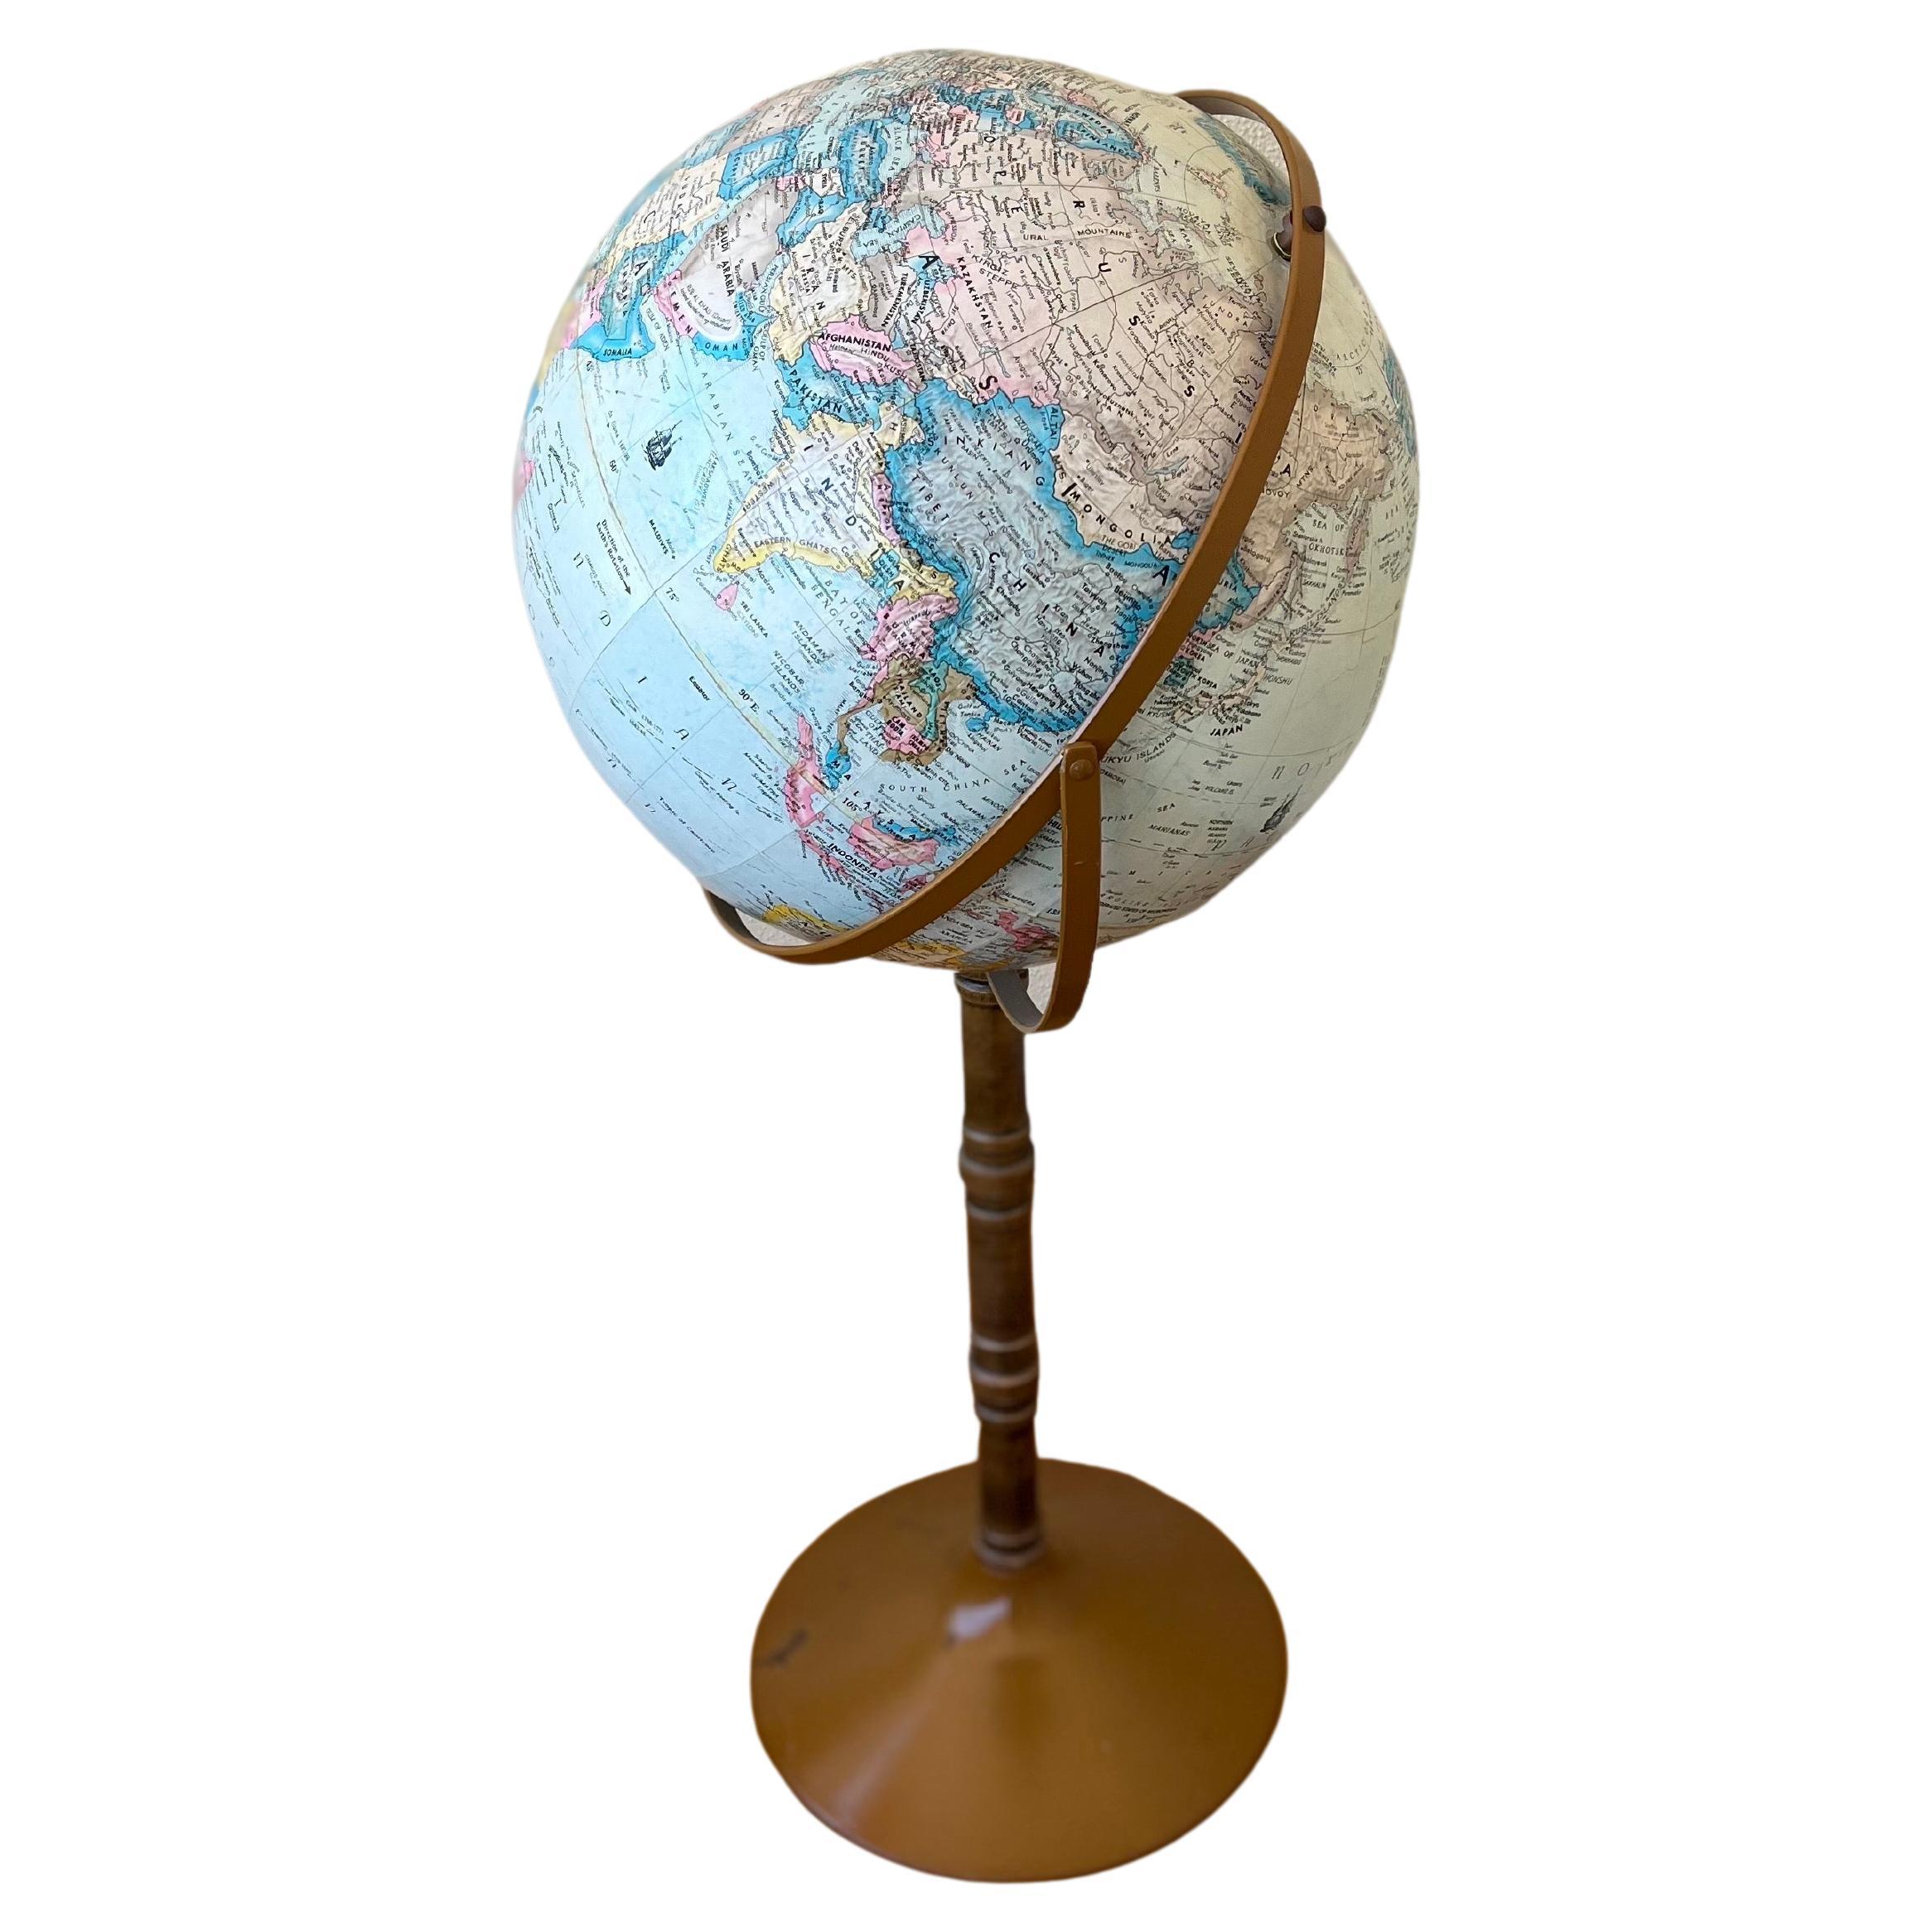 Nice floor stand model globe by Replogle Globes circa 1970's. original vintage condition with some light wear and a little rust on the base that can easily be repainted but it's sold AS/IS condition.